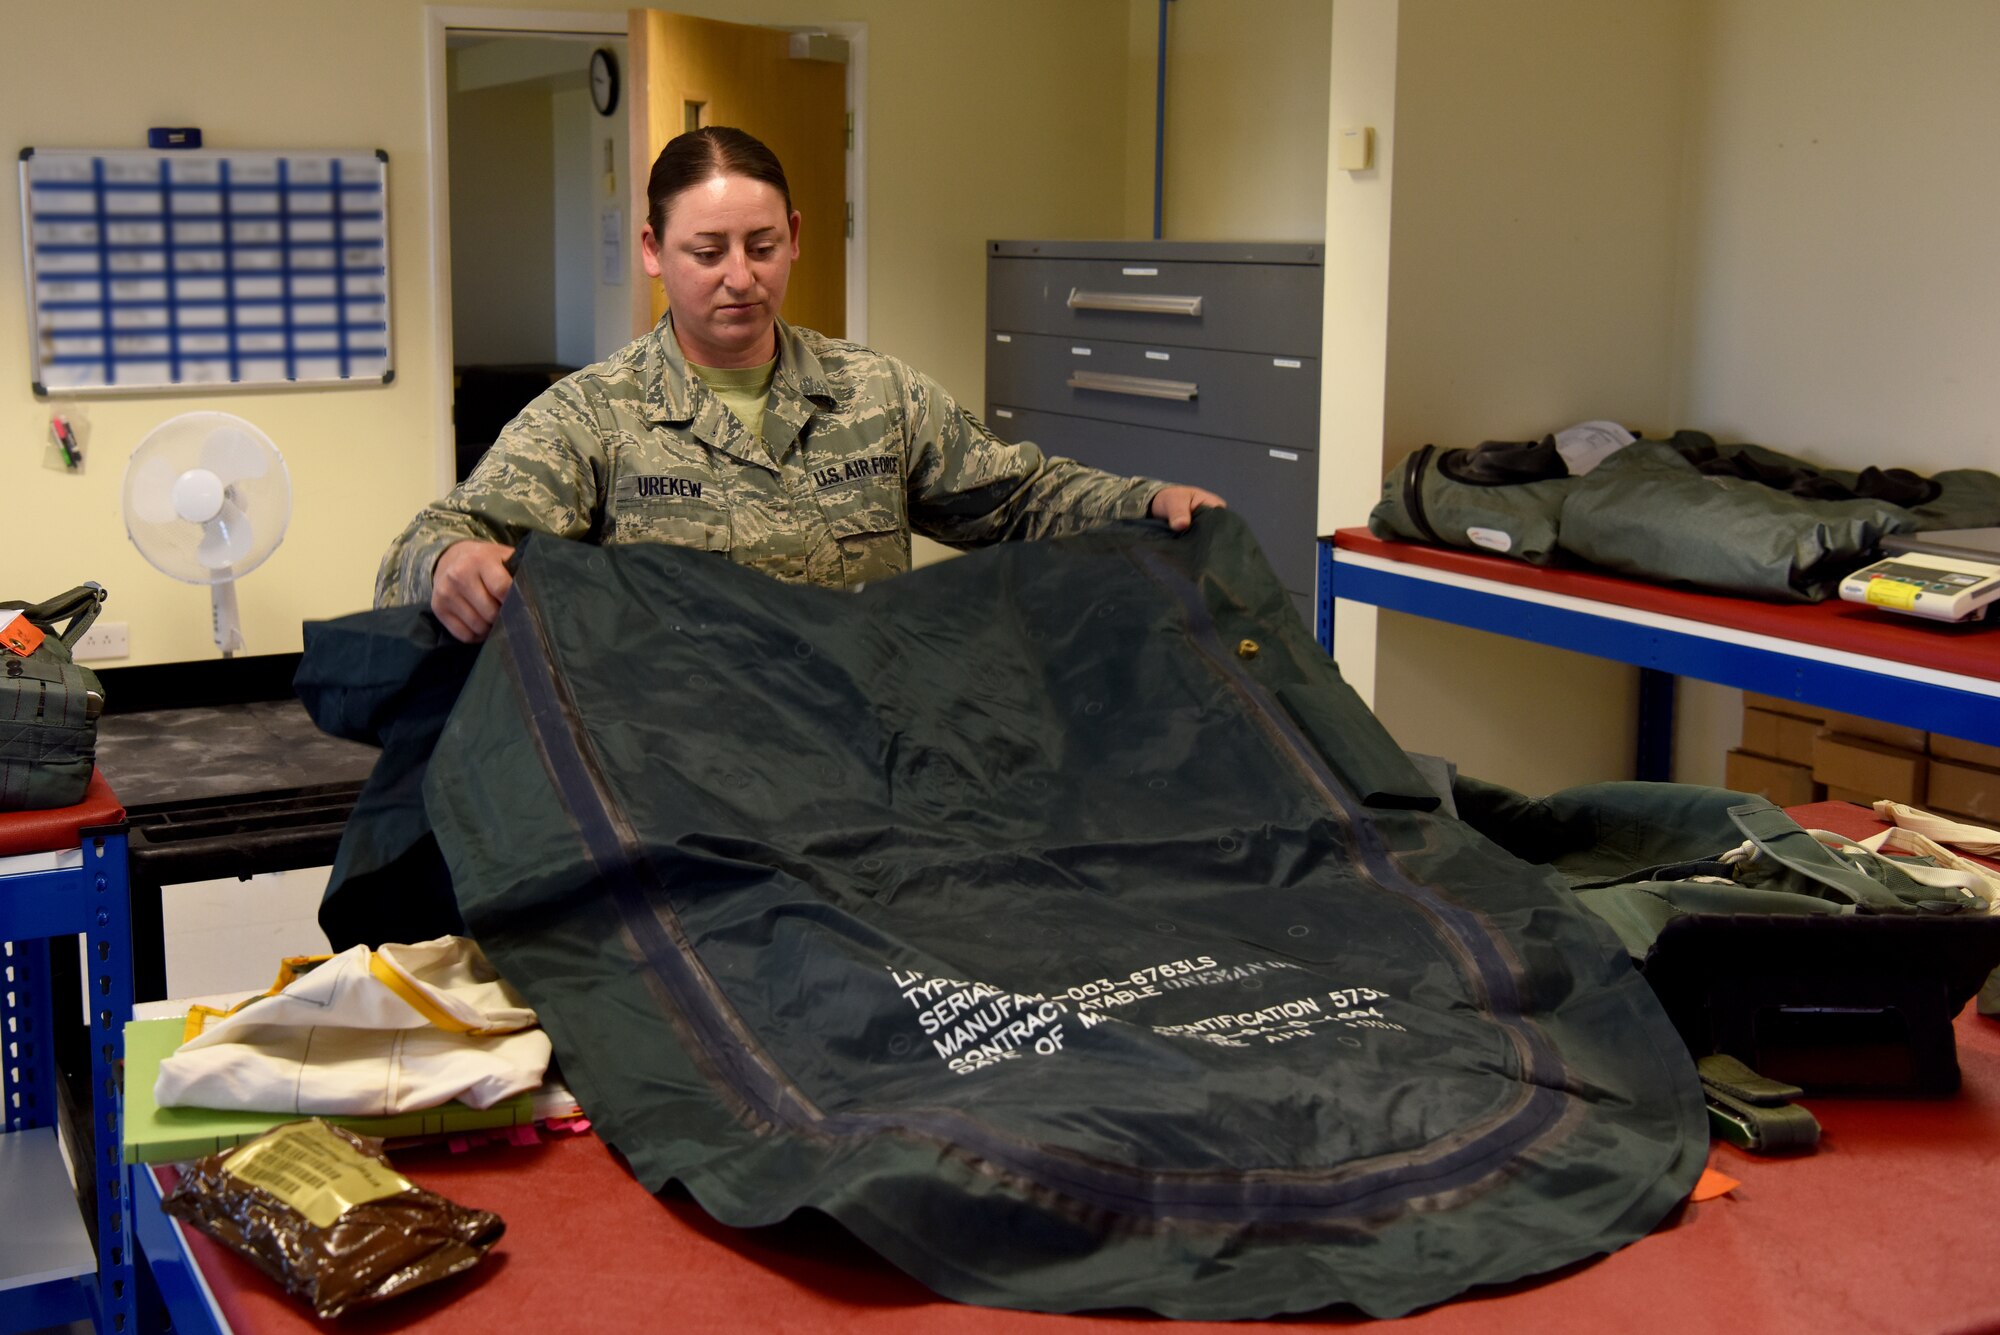 Tech. Sgt. Jessica Urekew, 48th Operation Support Squadron Aircrew Flight Equipment supervisor, inspects an emergency survival raft at Royal Air Force Lakenheath, England, Sept. 13, 2018. The peace of mind afforded to 48th Fighter Wing aircrew through efficiency and comfort during normal operations or survival and recovery during an emergency, is an invaluable contribution to the collective safety of Liberty Wing Airmen. (U.S. Air Force photo/ Senior Airman John A. Crawford)